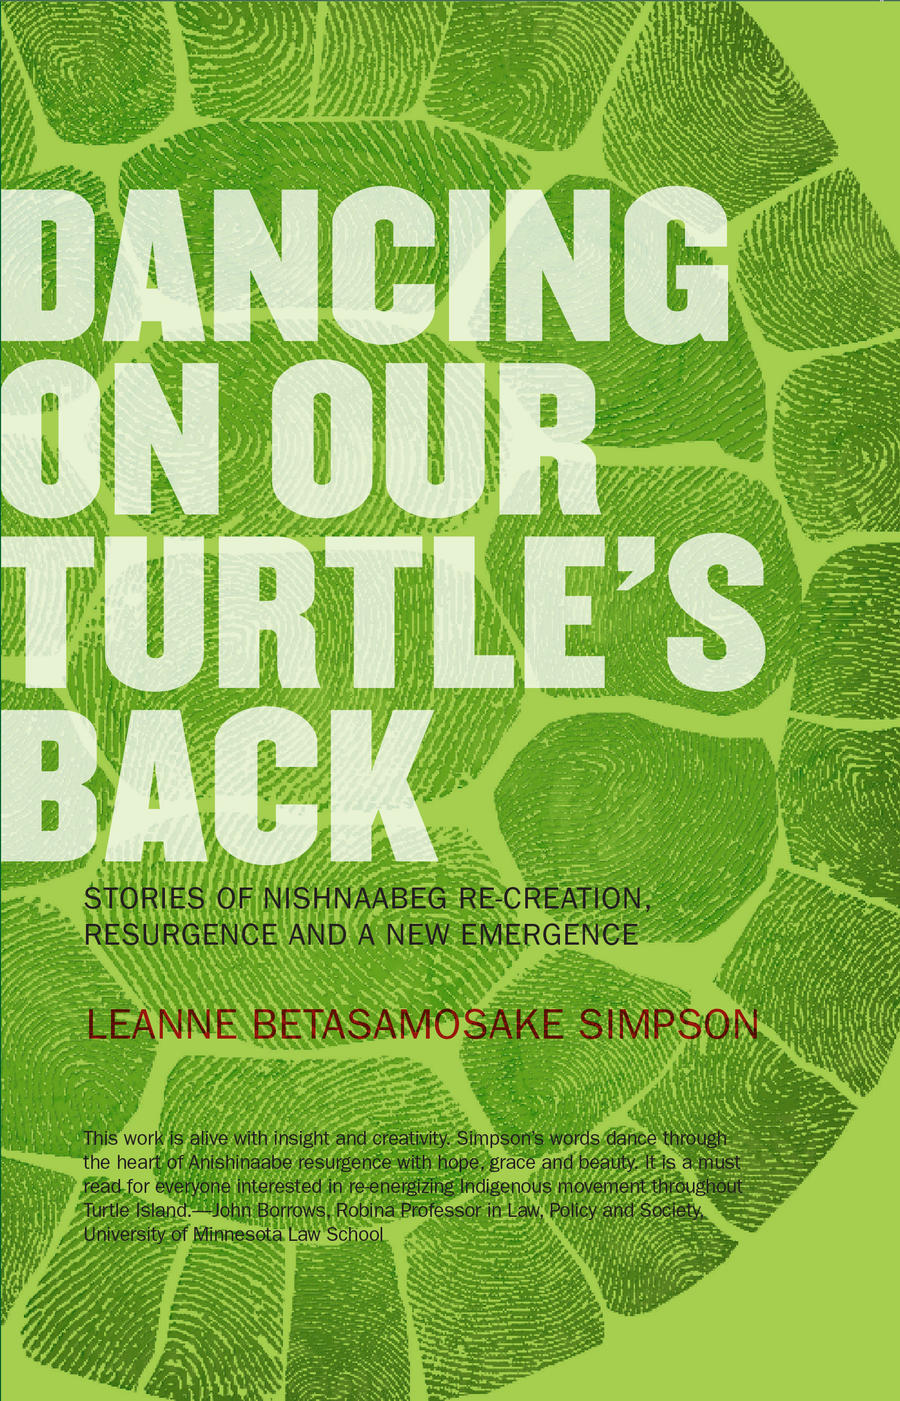 Image Dancing on our turtle's back : stories of Nishnaabeg re-creation, resurgence, and a new emergence